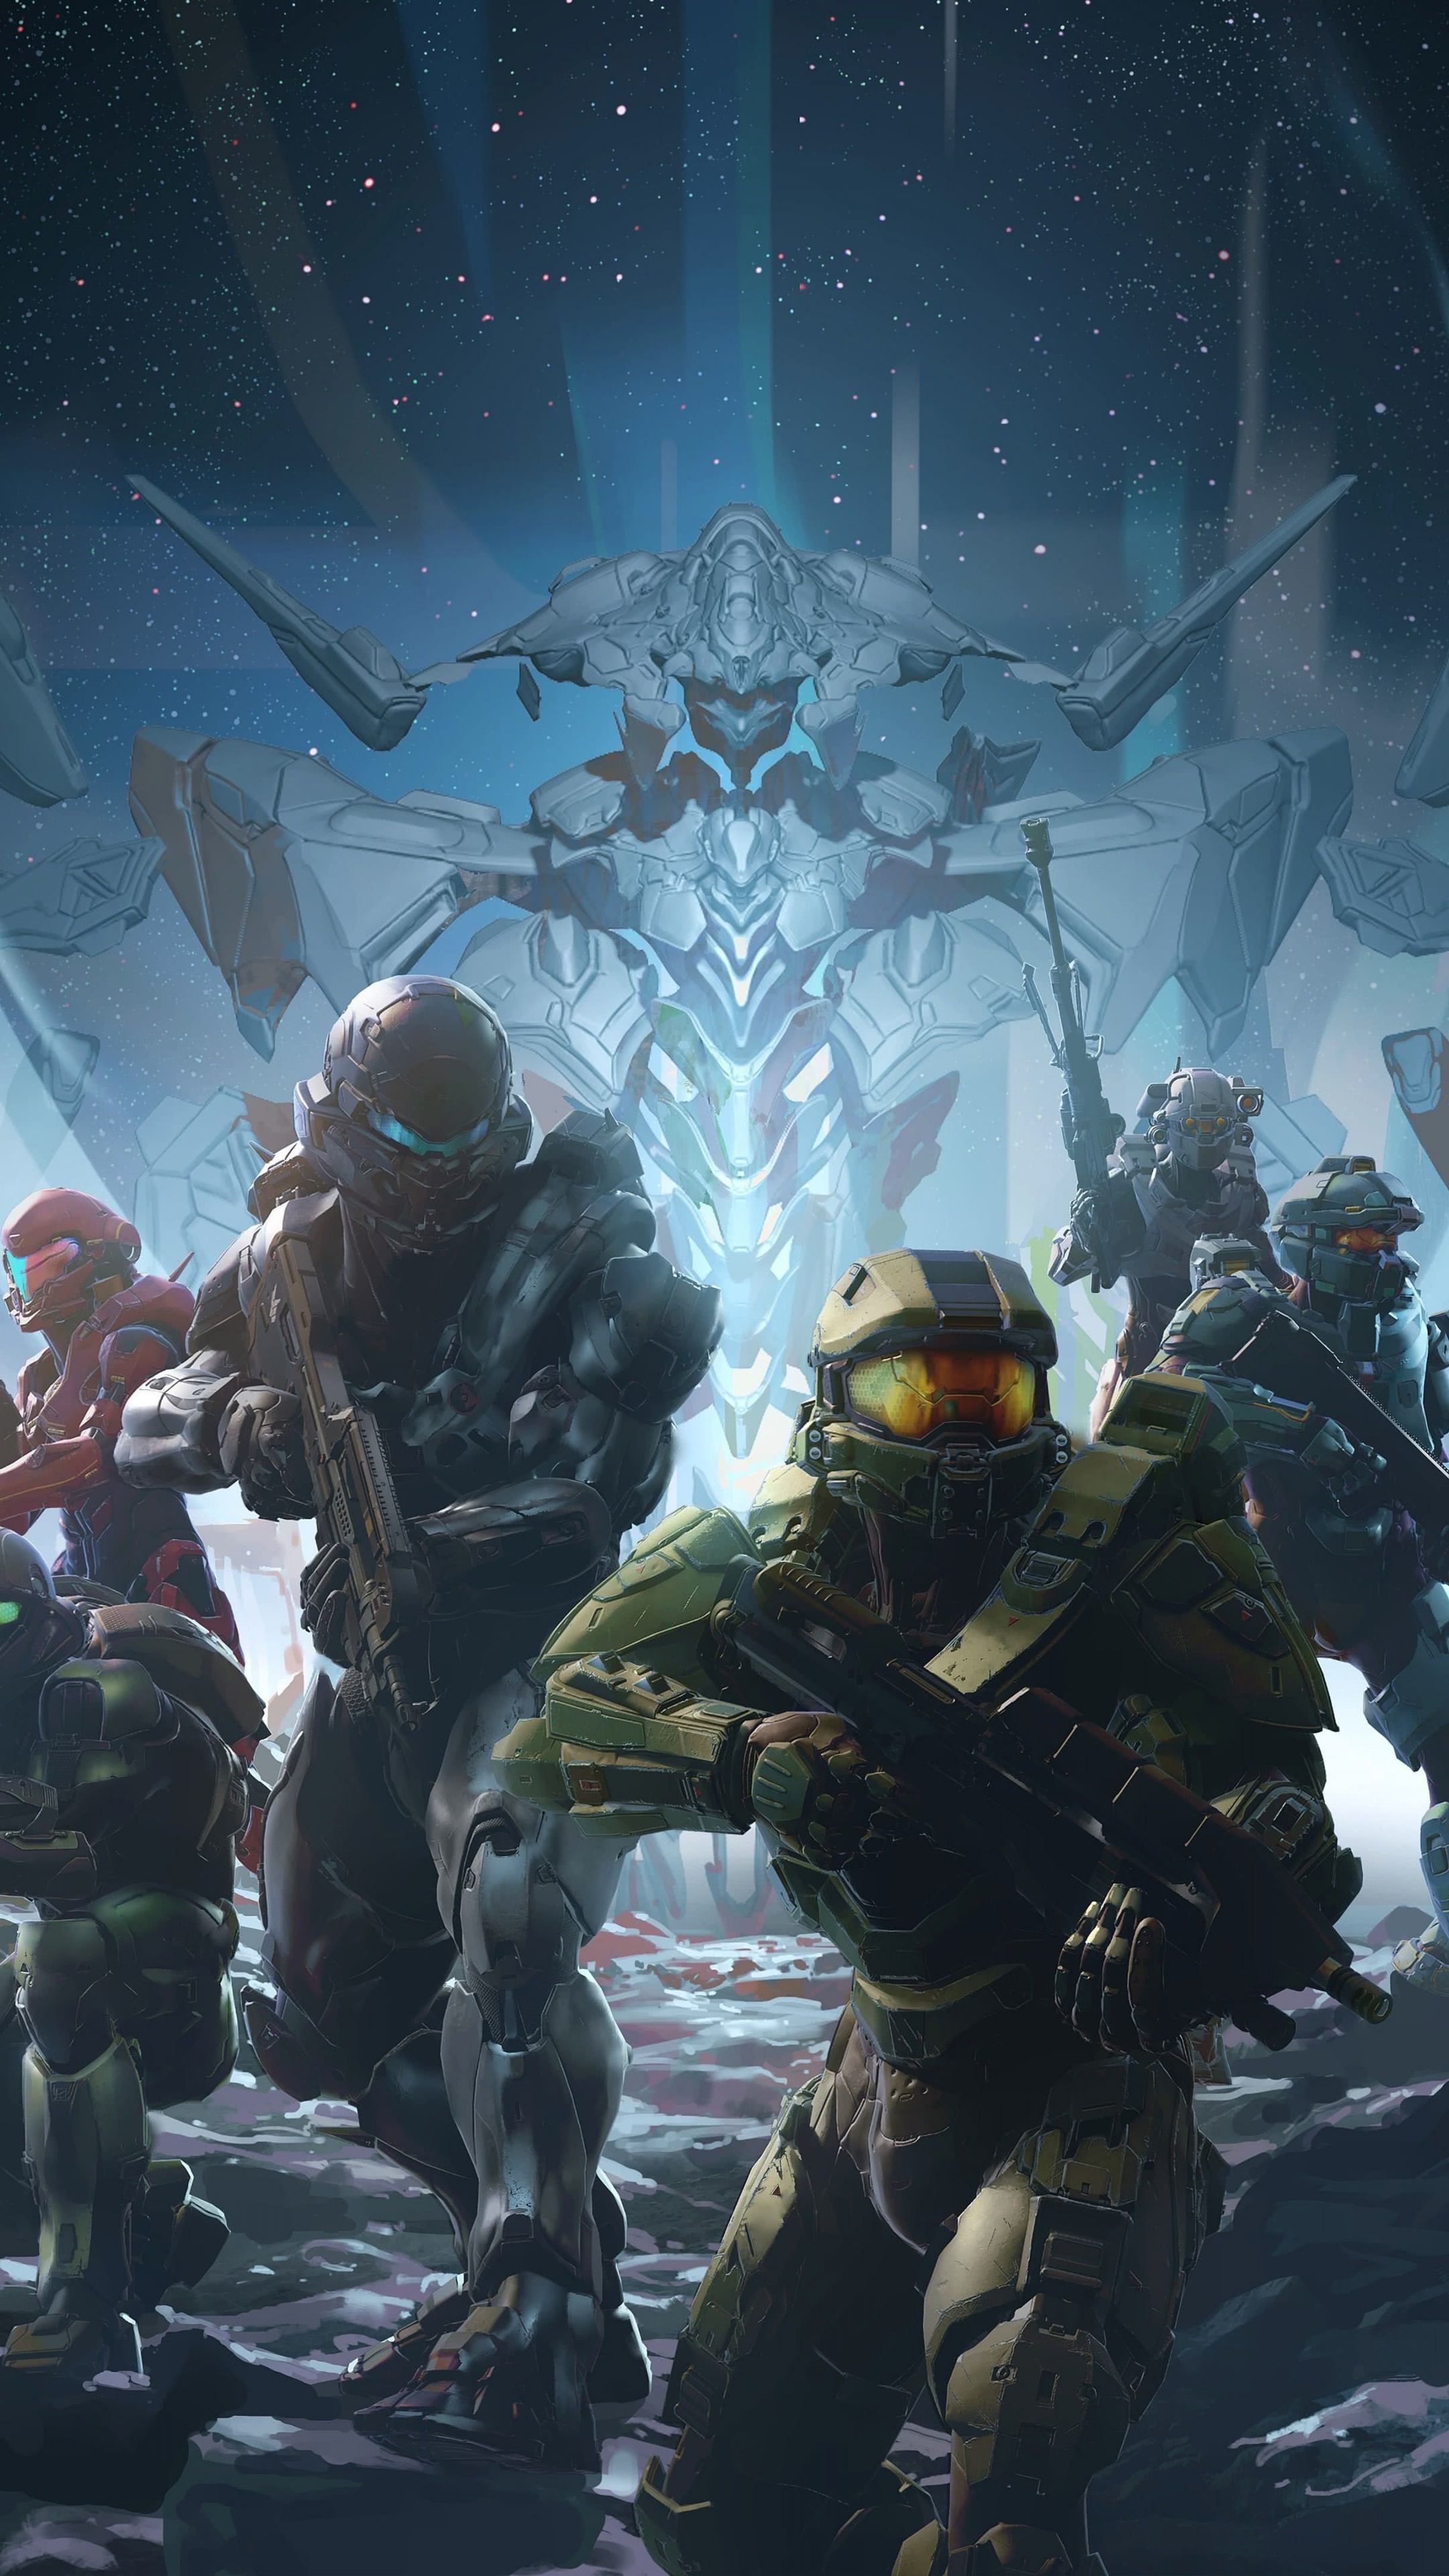 Halo 5 Guardians Video Game Soldier Wallpaper, Sony Xperia Z5 Premium Dual, 2160x3840 4K Phone